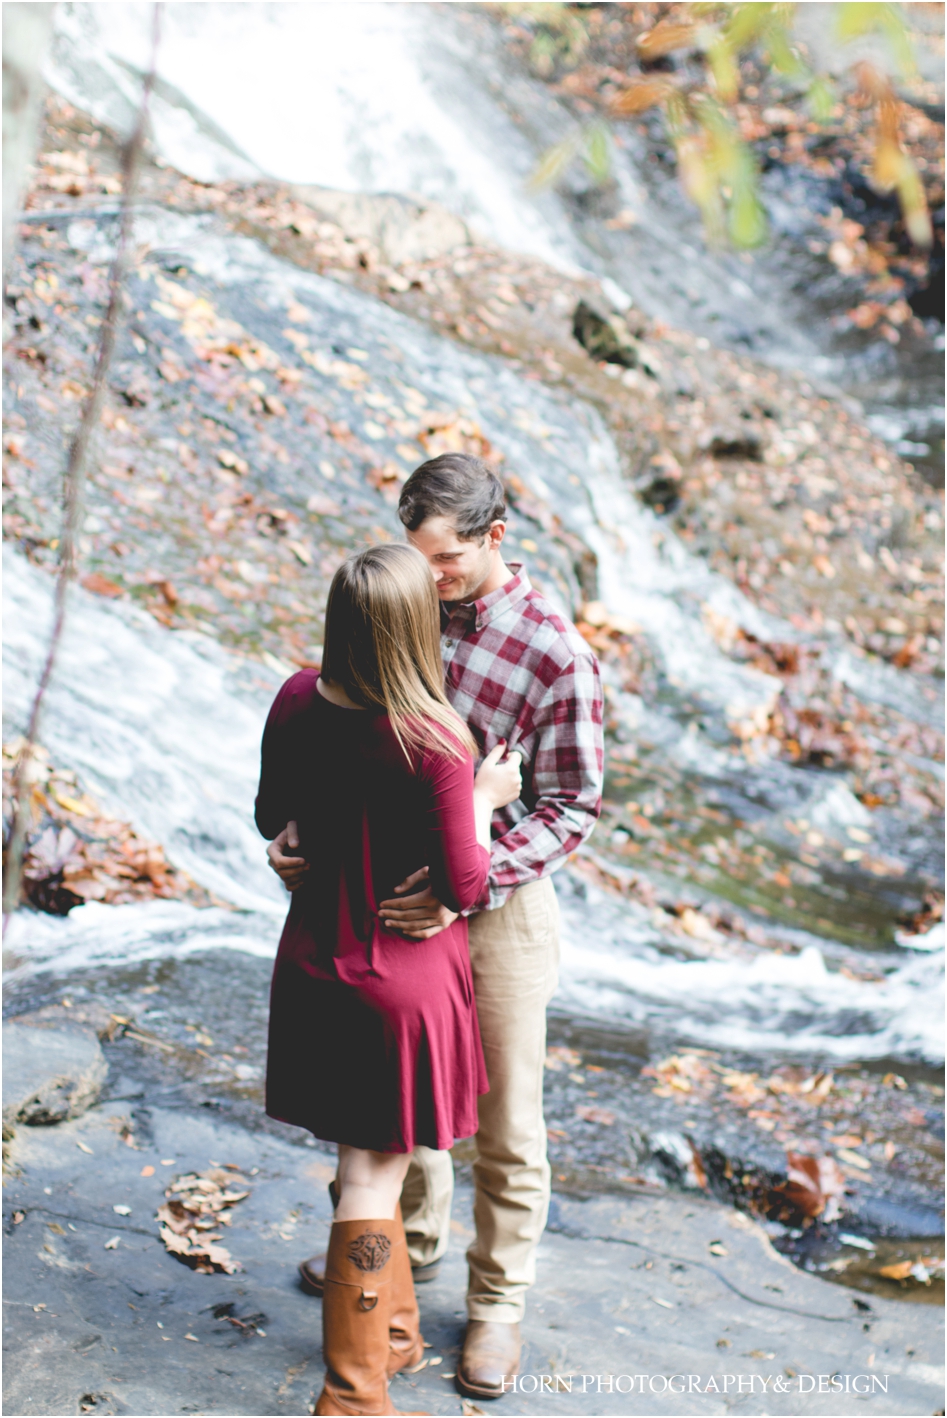 horn-photography-and-design-talking-rock-engagement_0564